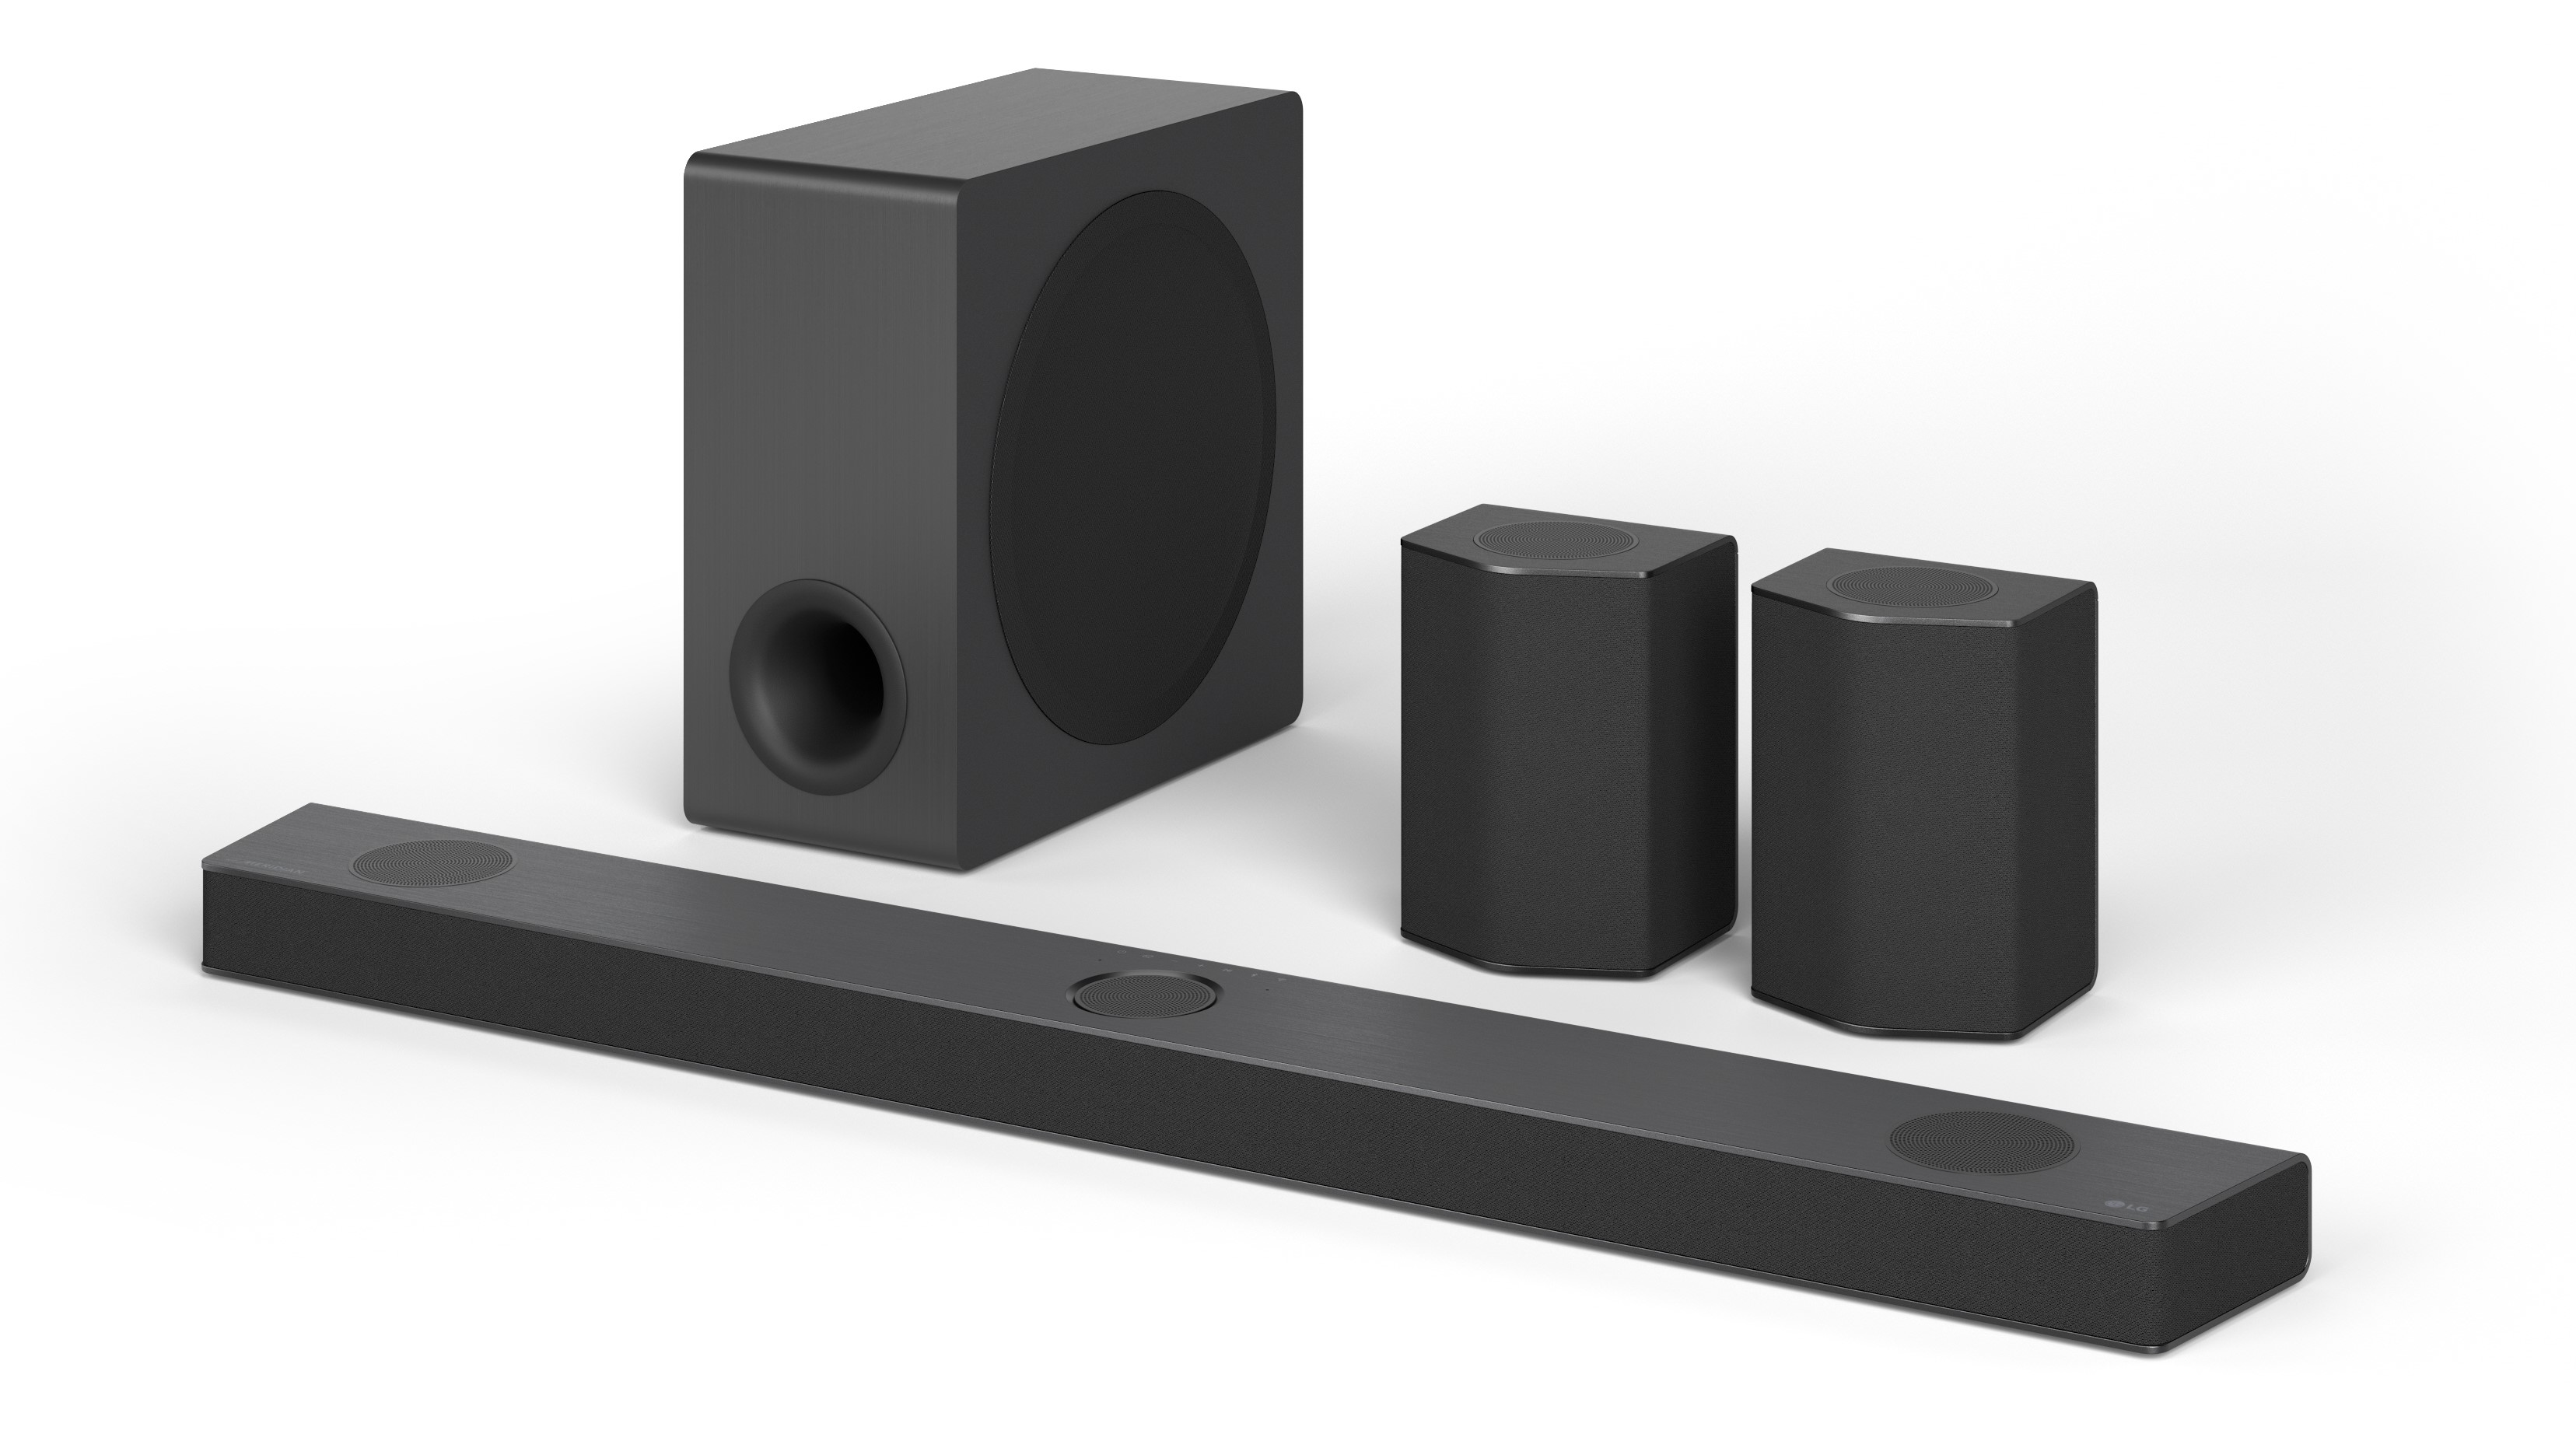 LG S95QR Sound Bar with surround speakers and subwoofer in black on a white background